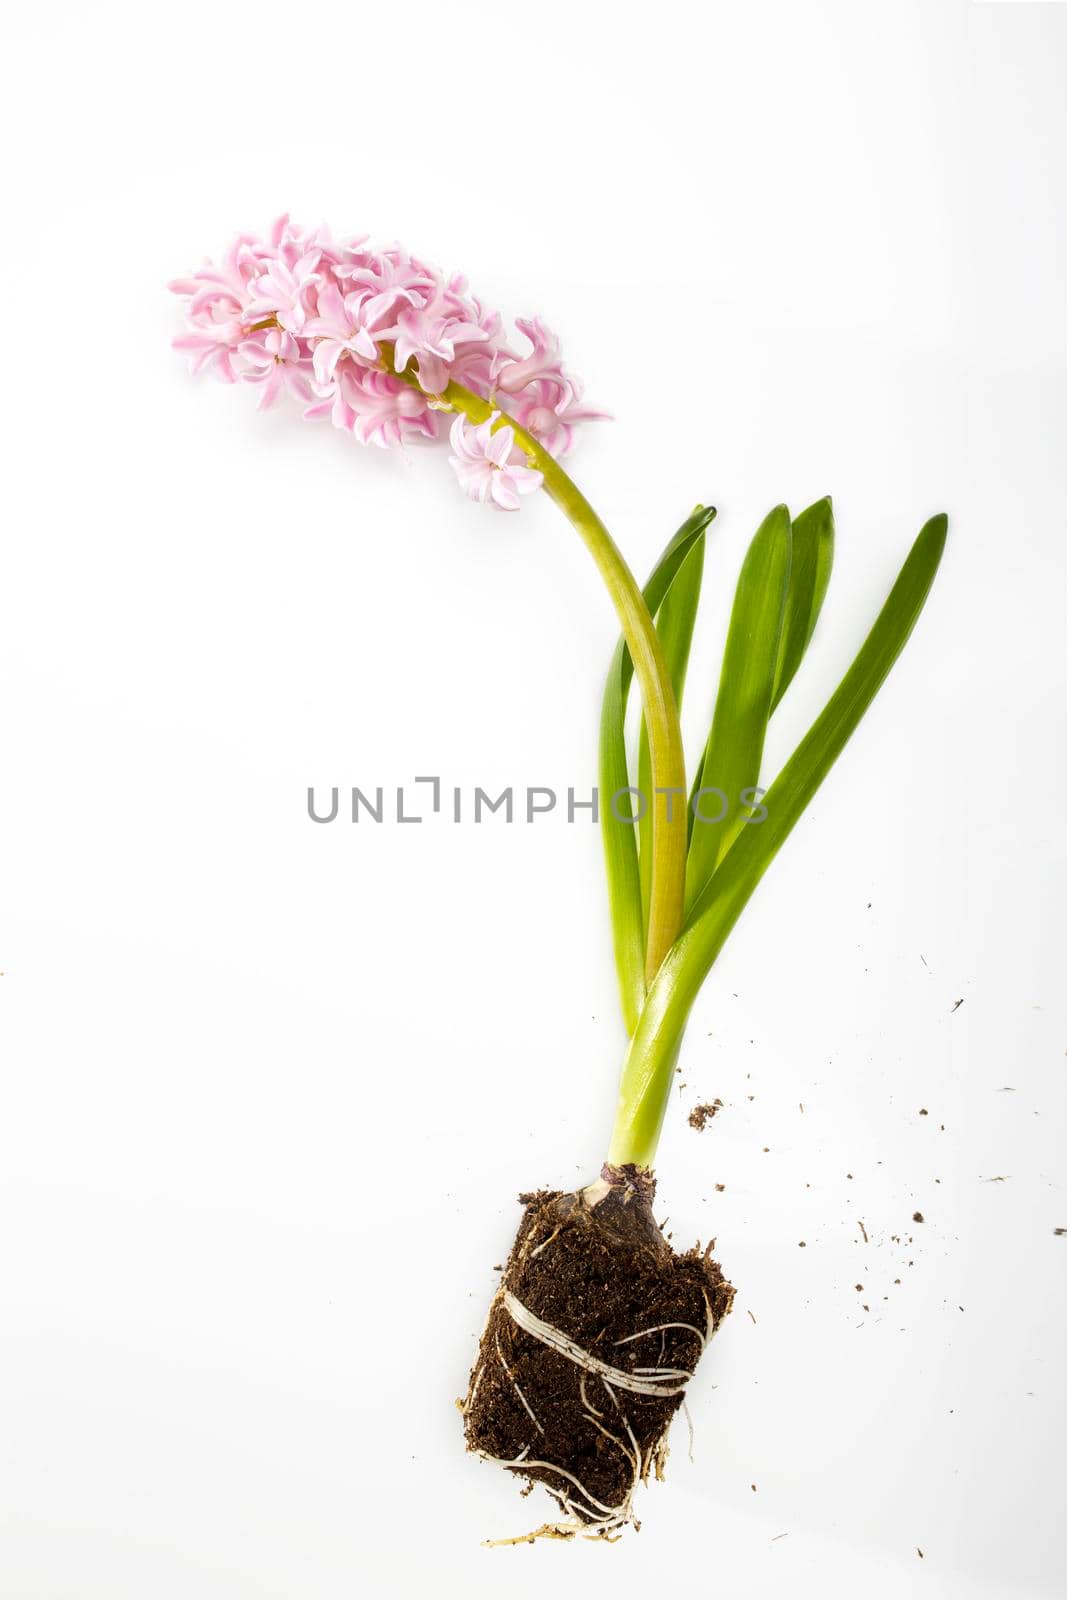 hyacinth plant with pink flowers, bulbs and roots on a white background